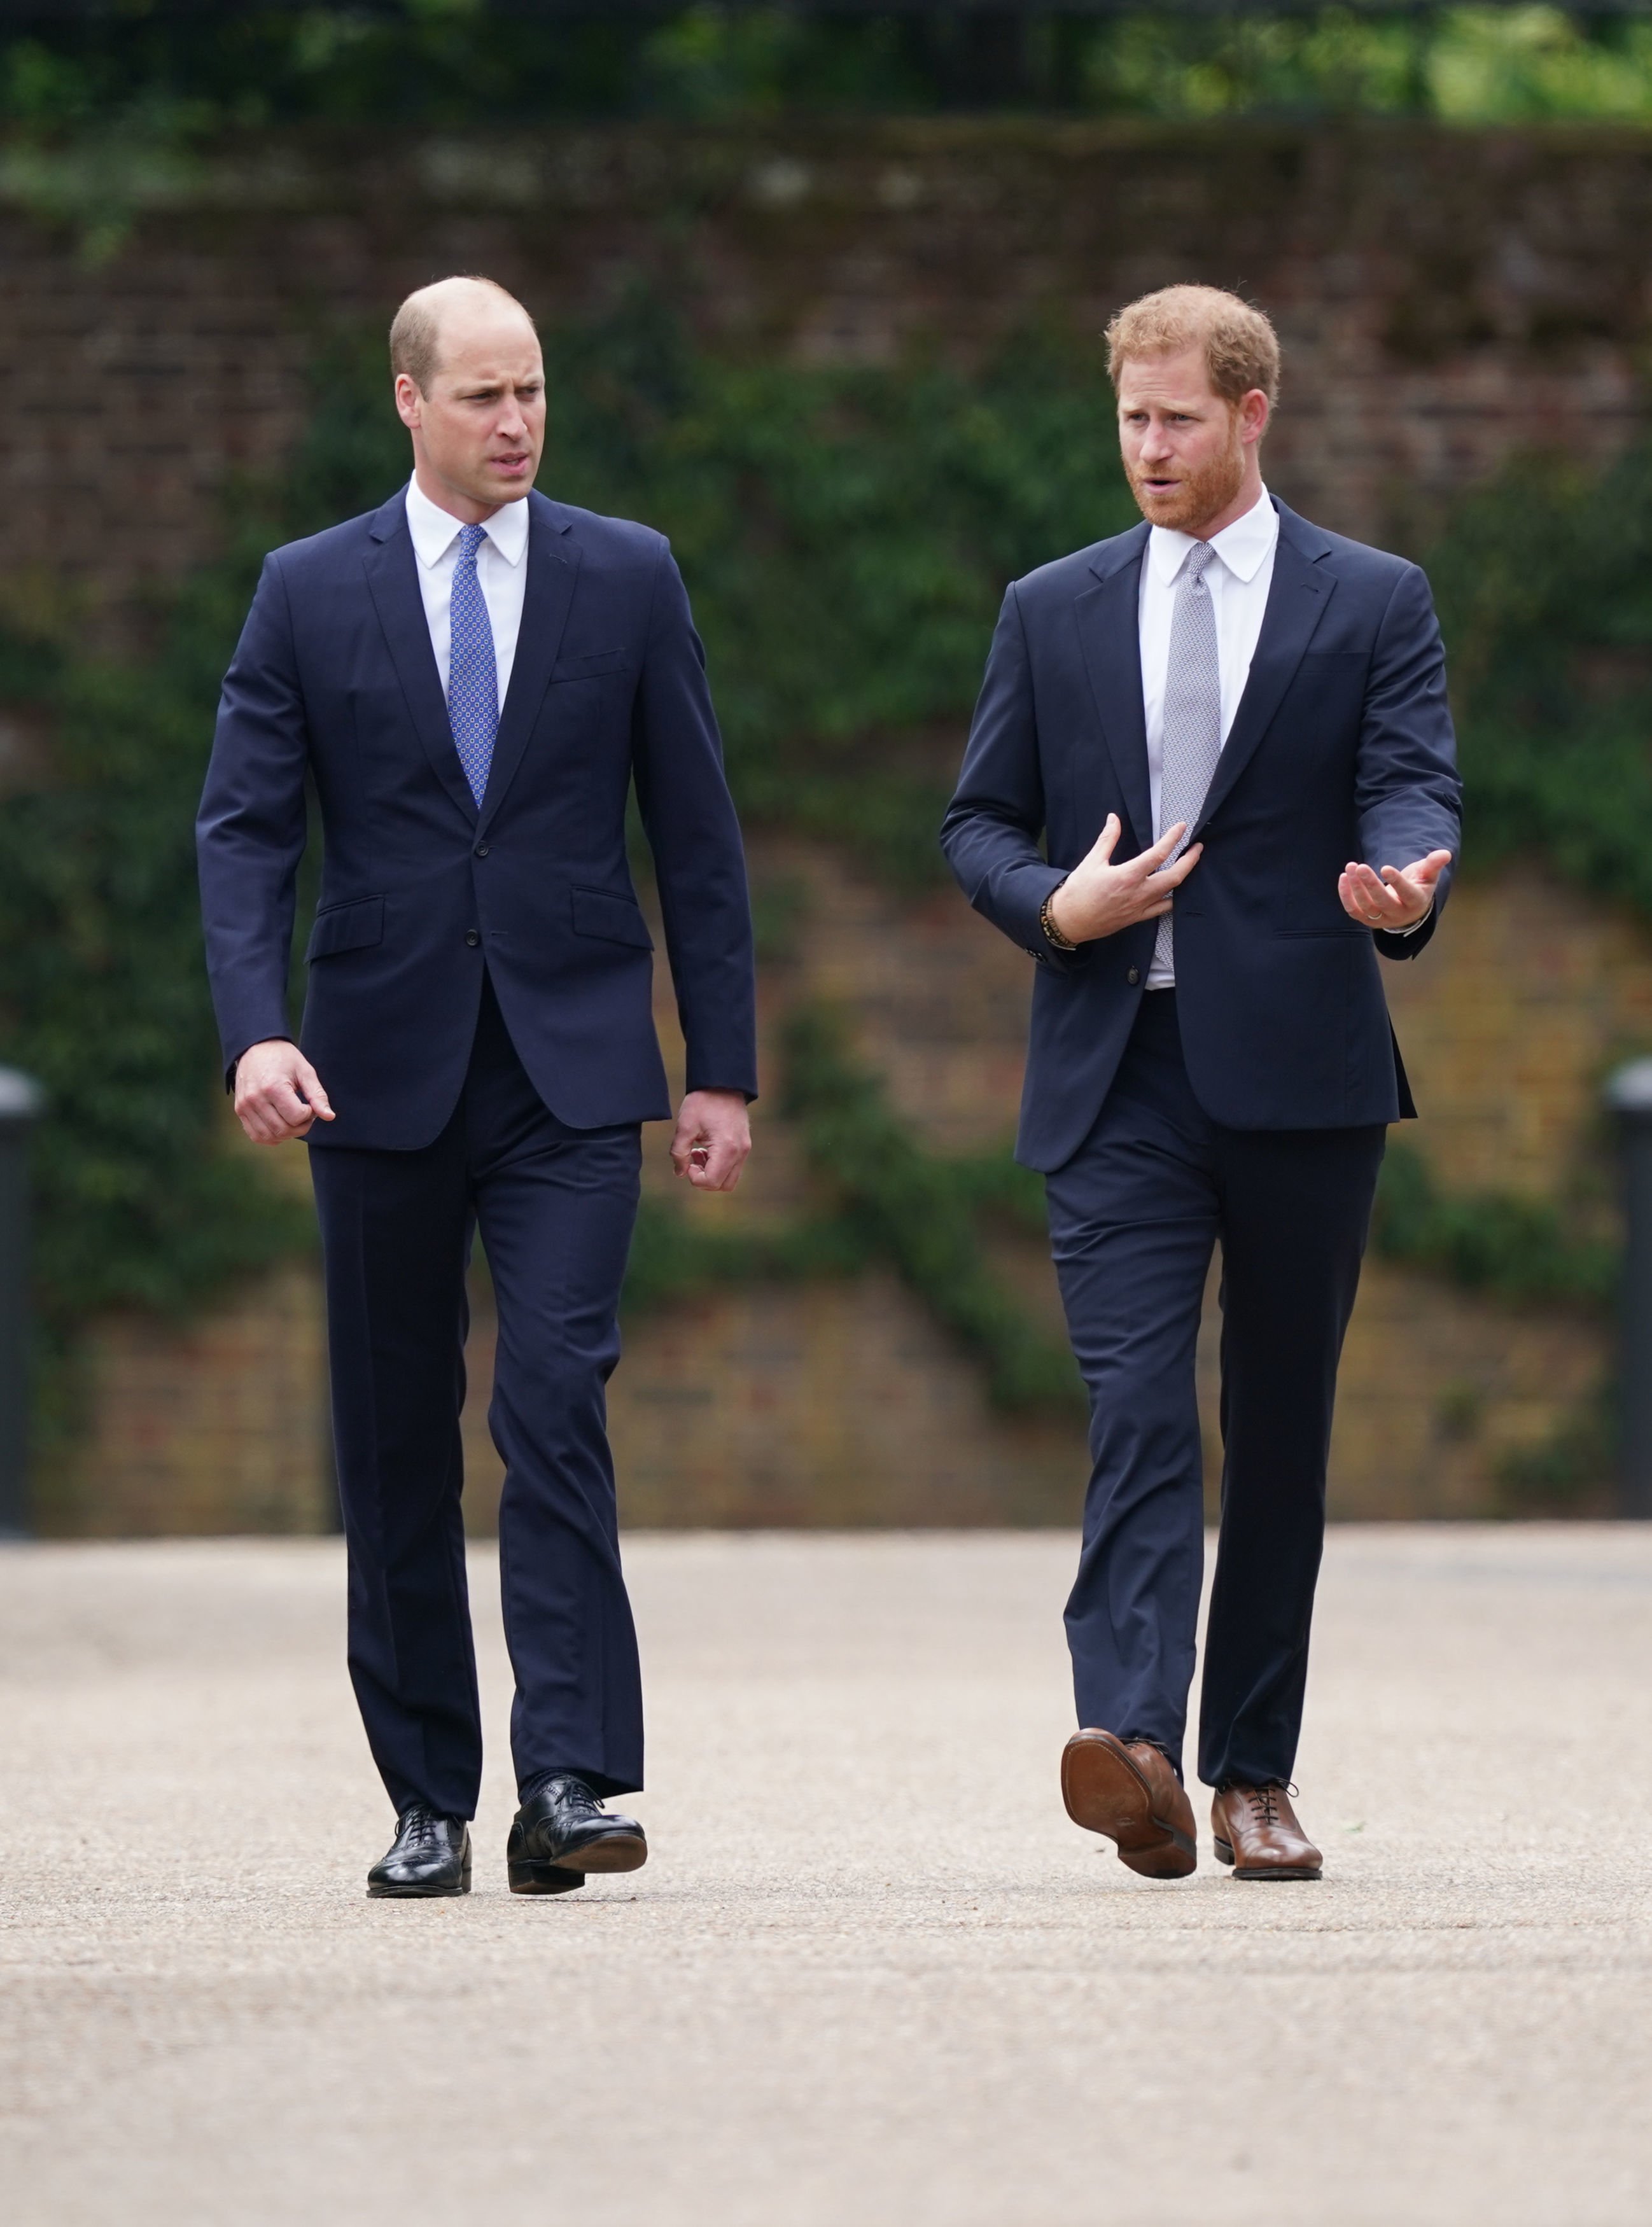 Prince William, Duke of Cambridge (left) and Prince Harry, Duke of Sussex arrive for the unveiling of a statue they commissioned of their mother Diana, Princess of Wales, in the Sunken Garden at Kensington Palace, on what would have been her 60th birthday on July 1, 2021 in London, England. | Source: Getty Images